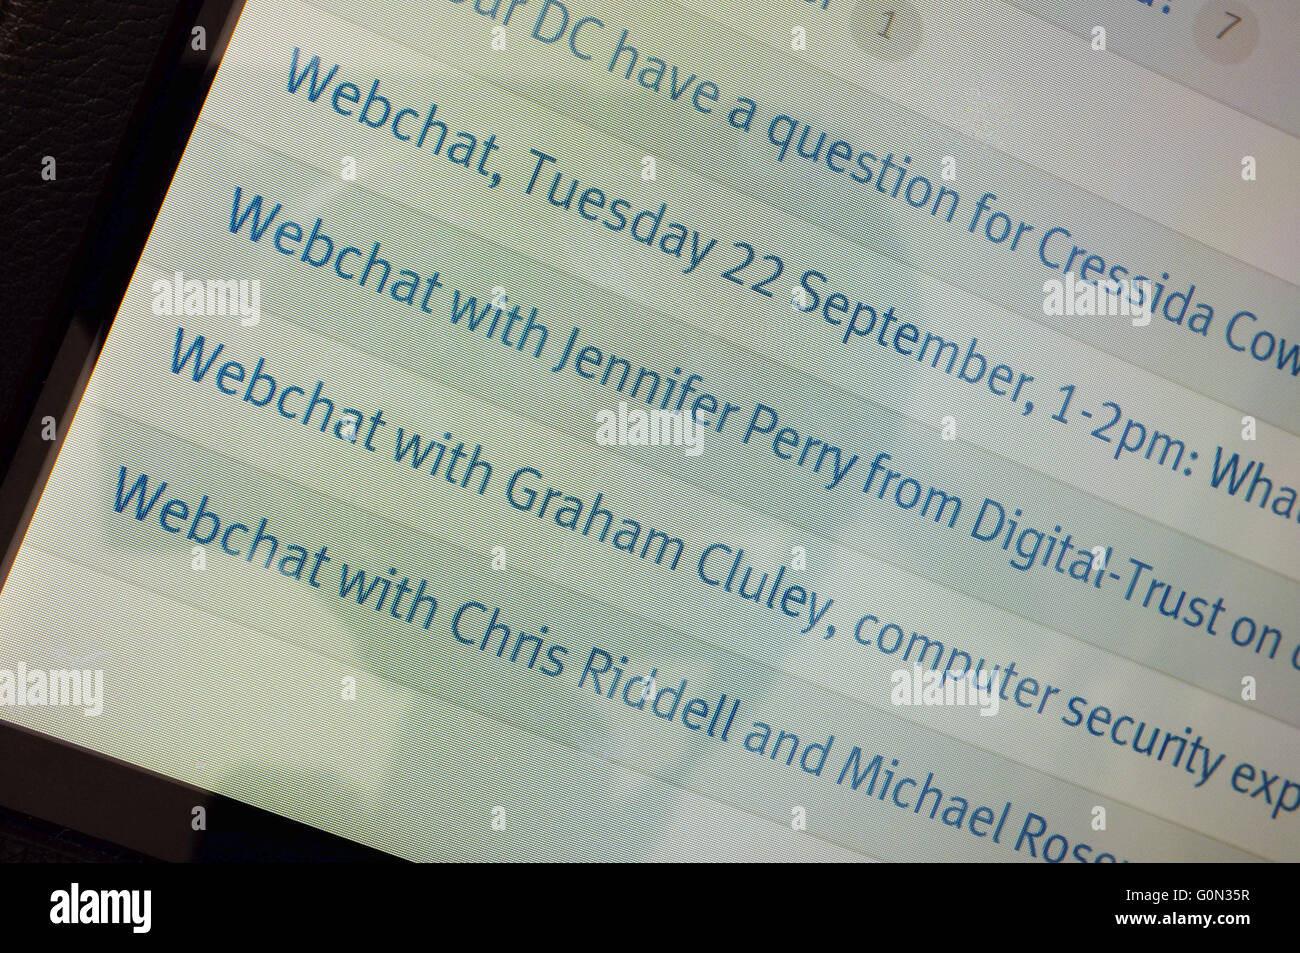 Mumsnet webchats displayed on the screen of a tablet. Stock Photo